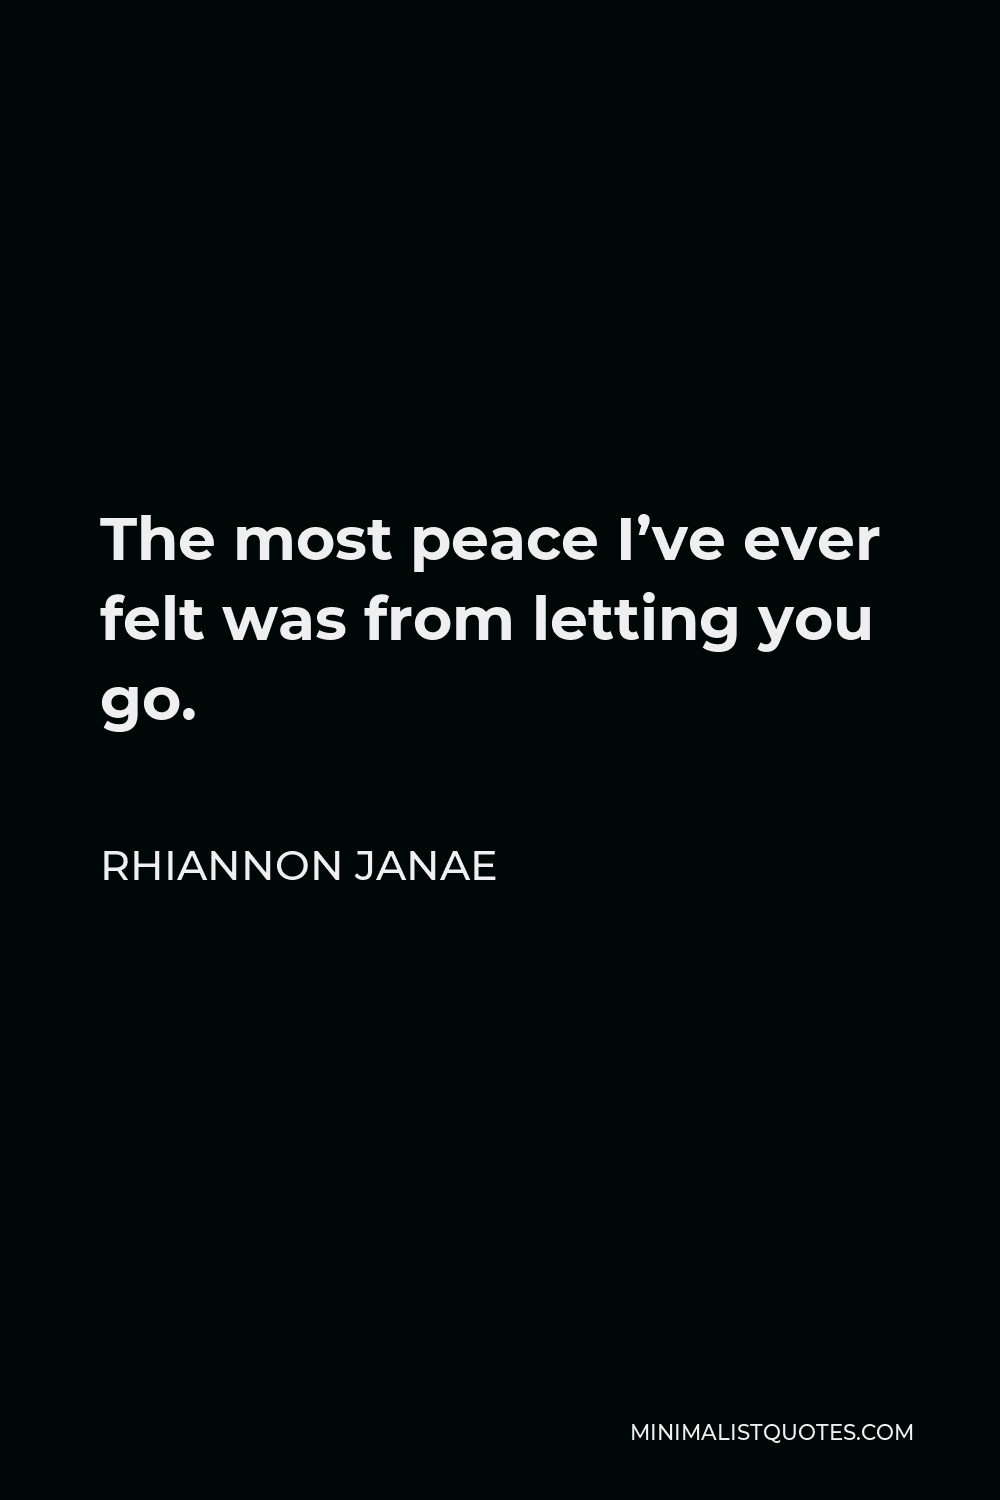 Rhiannon Janae Quote - The most peace I’ve ever felt was from letting you go.